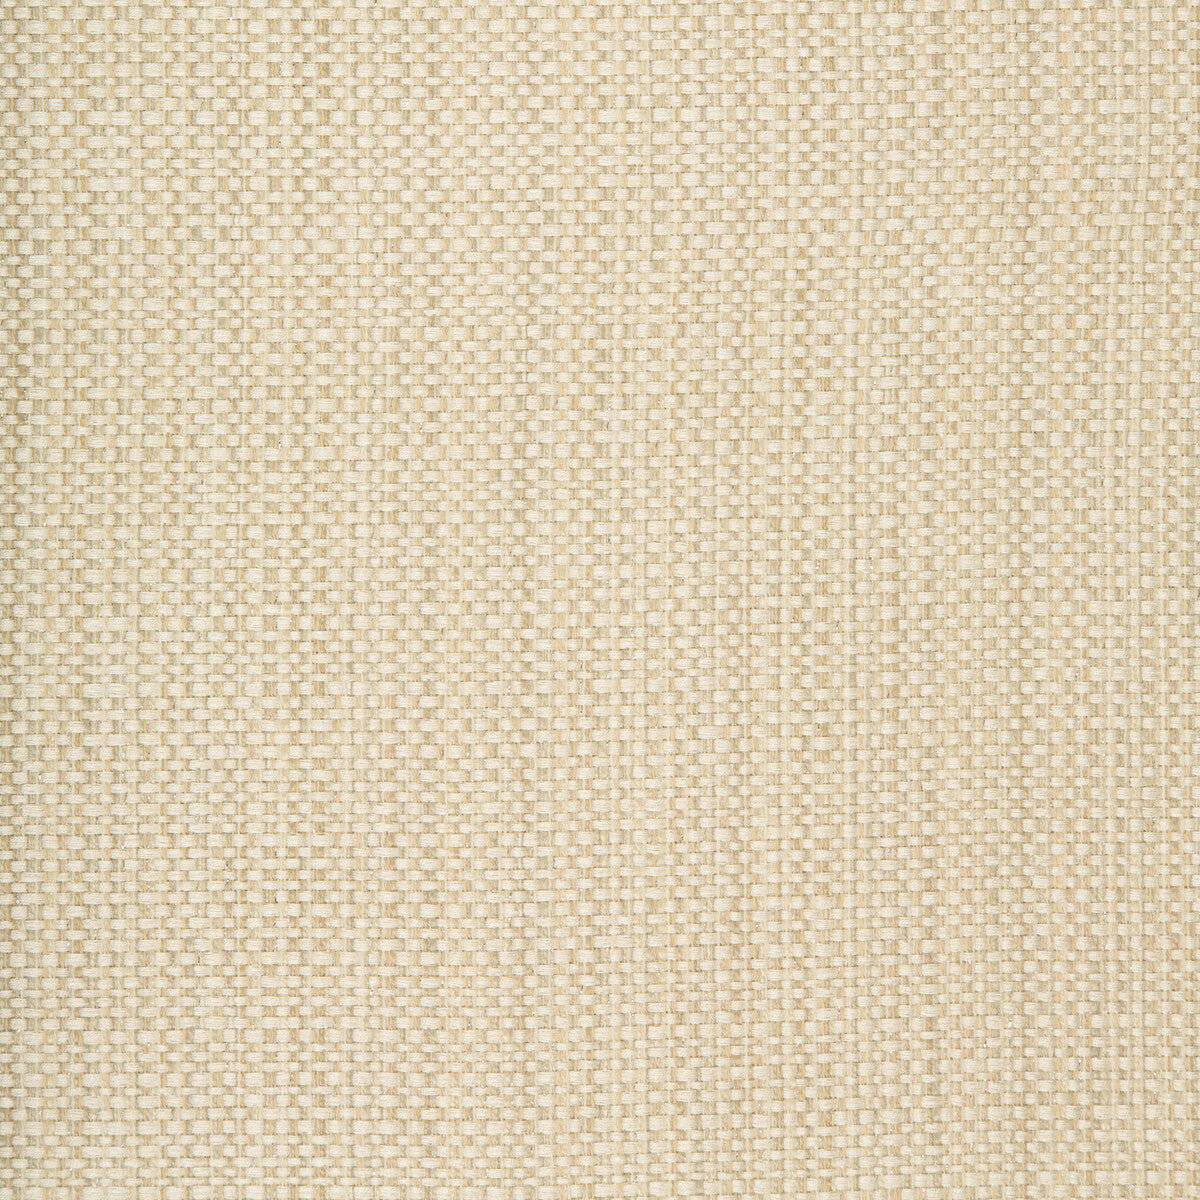 Kravet Contract fabric in 34746-116 color - pattern 34746.116.0 - by Kravet Contract in the Incase Crypton Gis collection